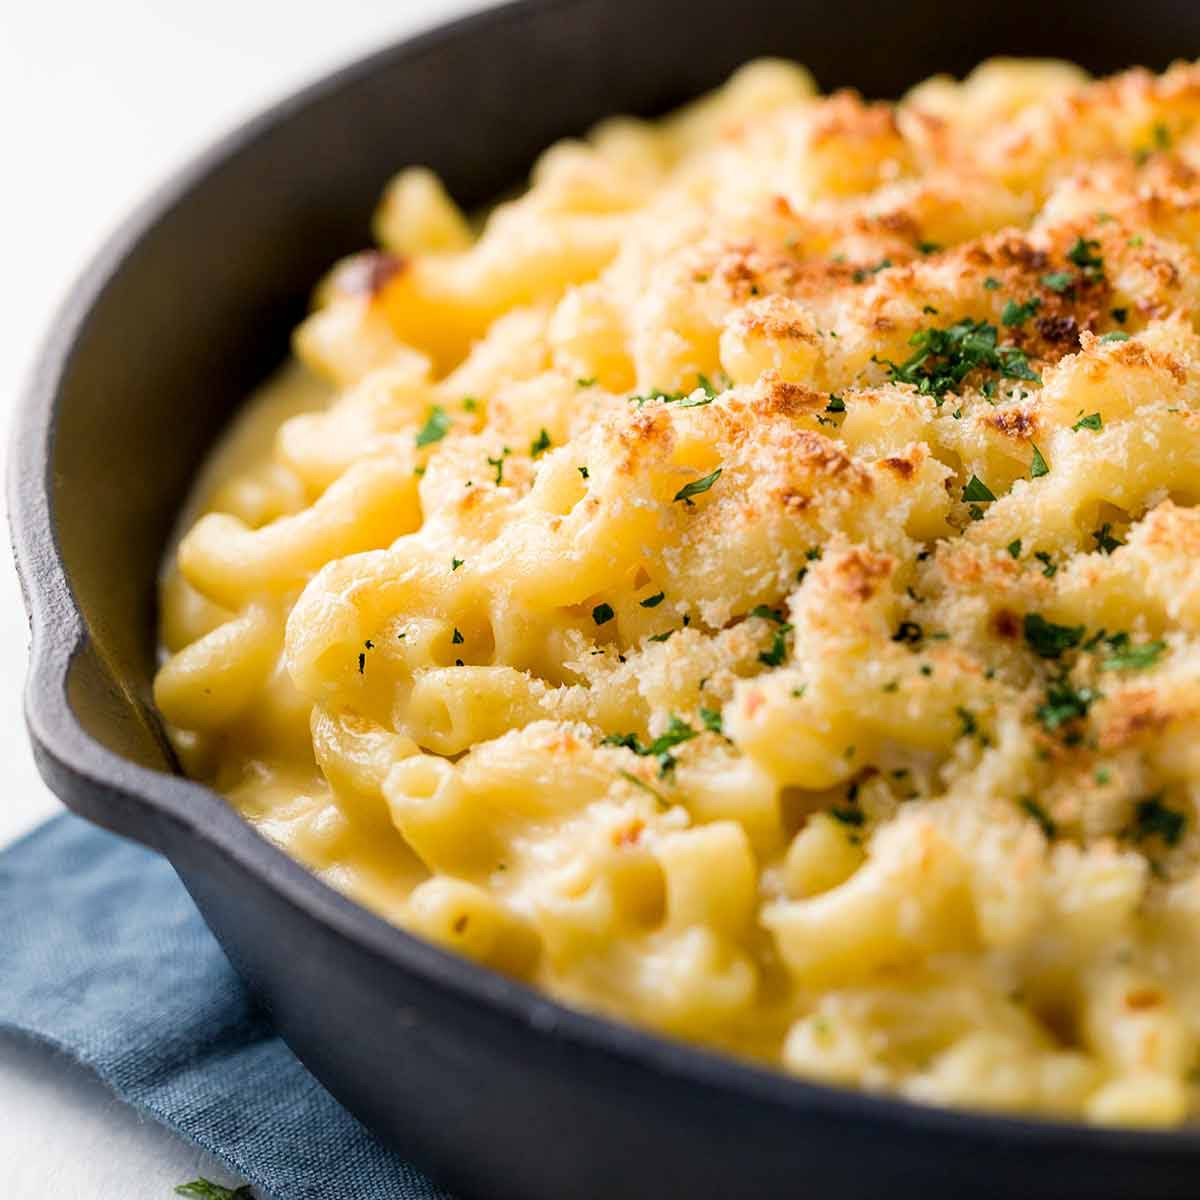 Baked Macaroni And Cheese With Bread Crumbs Recipe
 10 Best Baked Macaroni and Cheese with Bread Crumbs Recipes